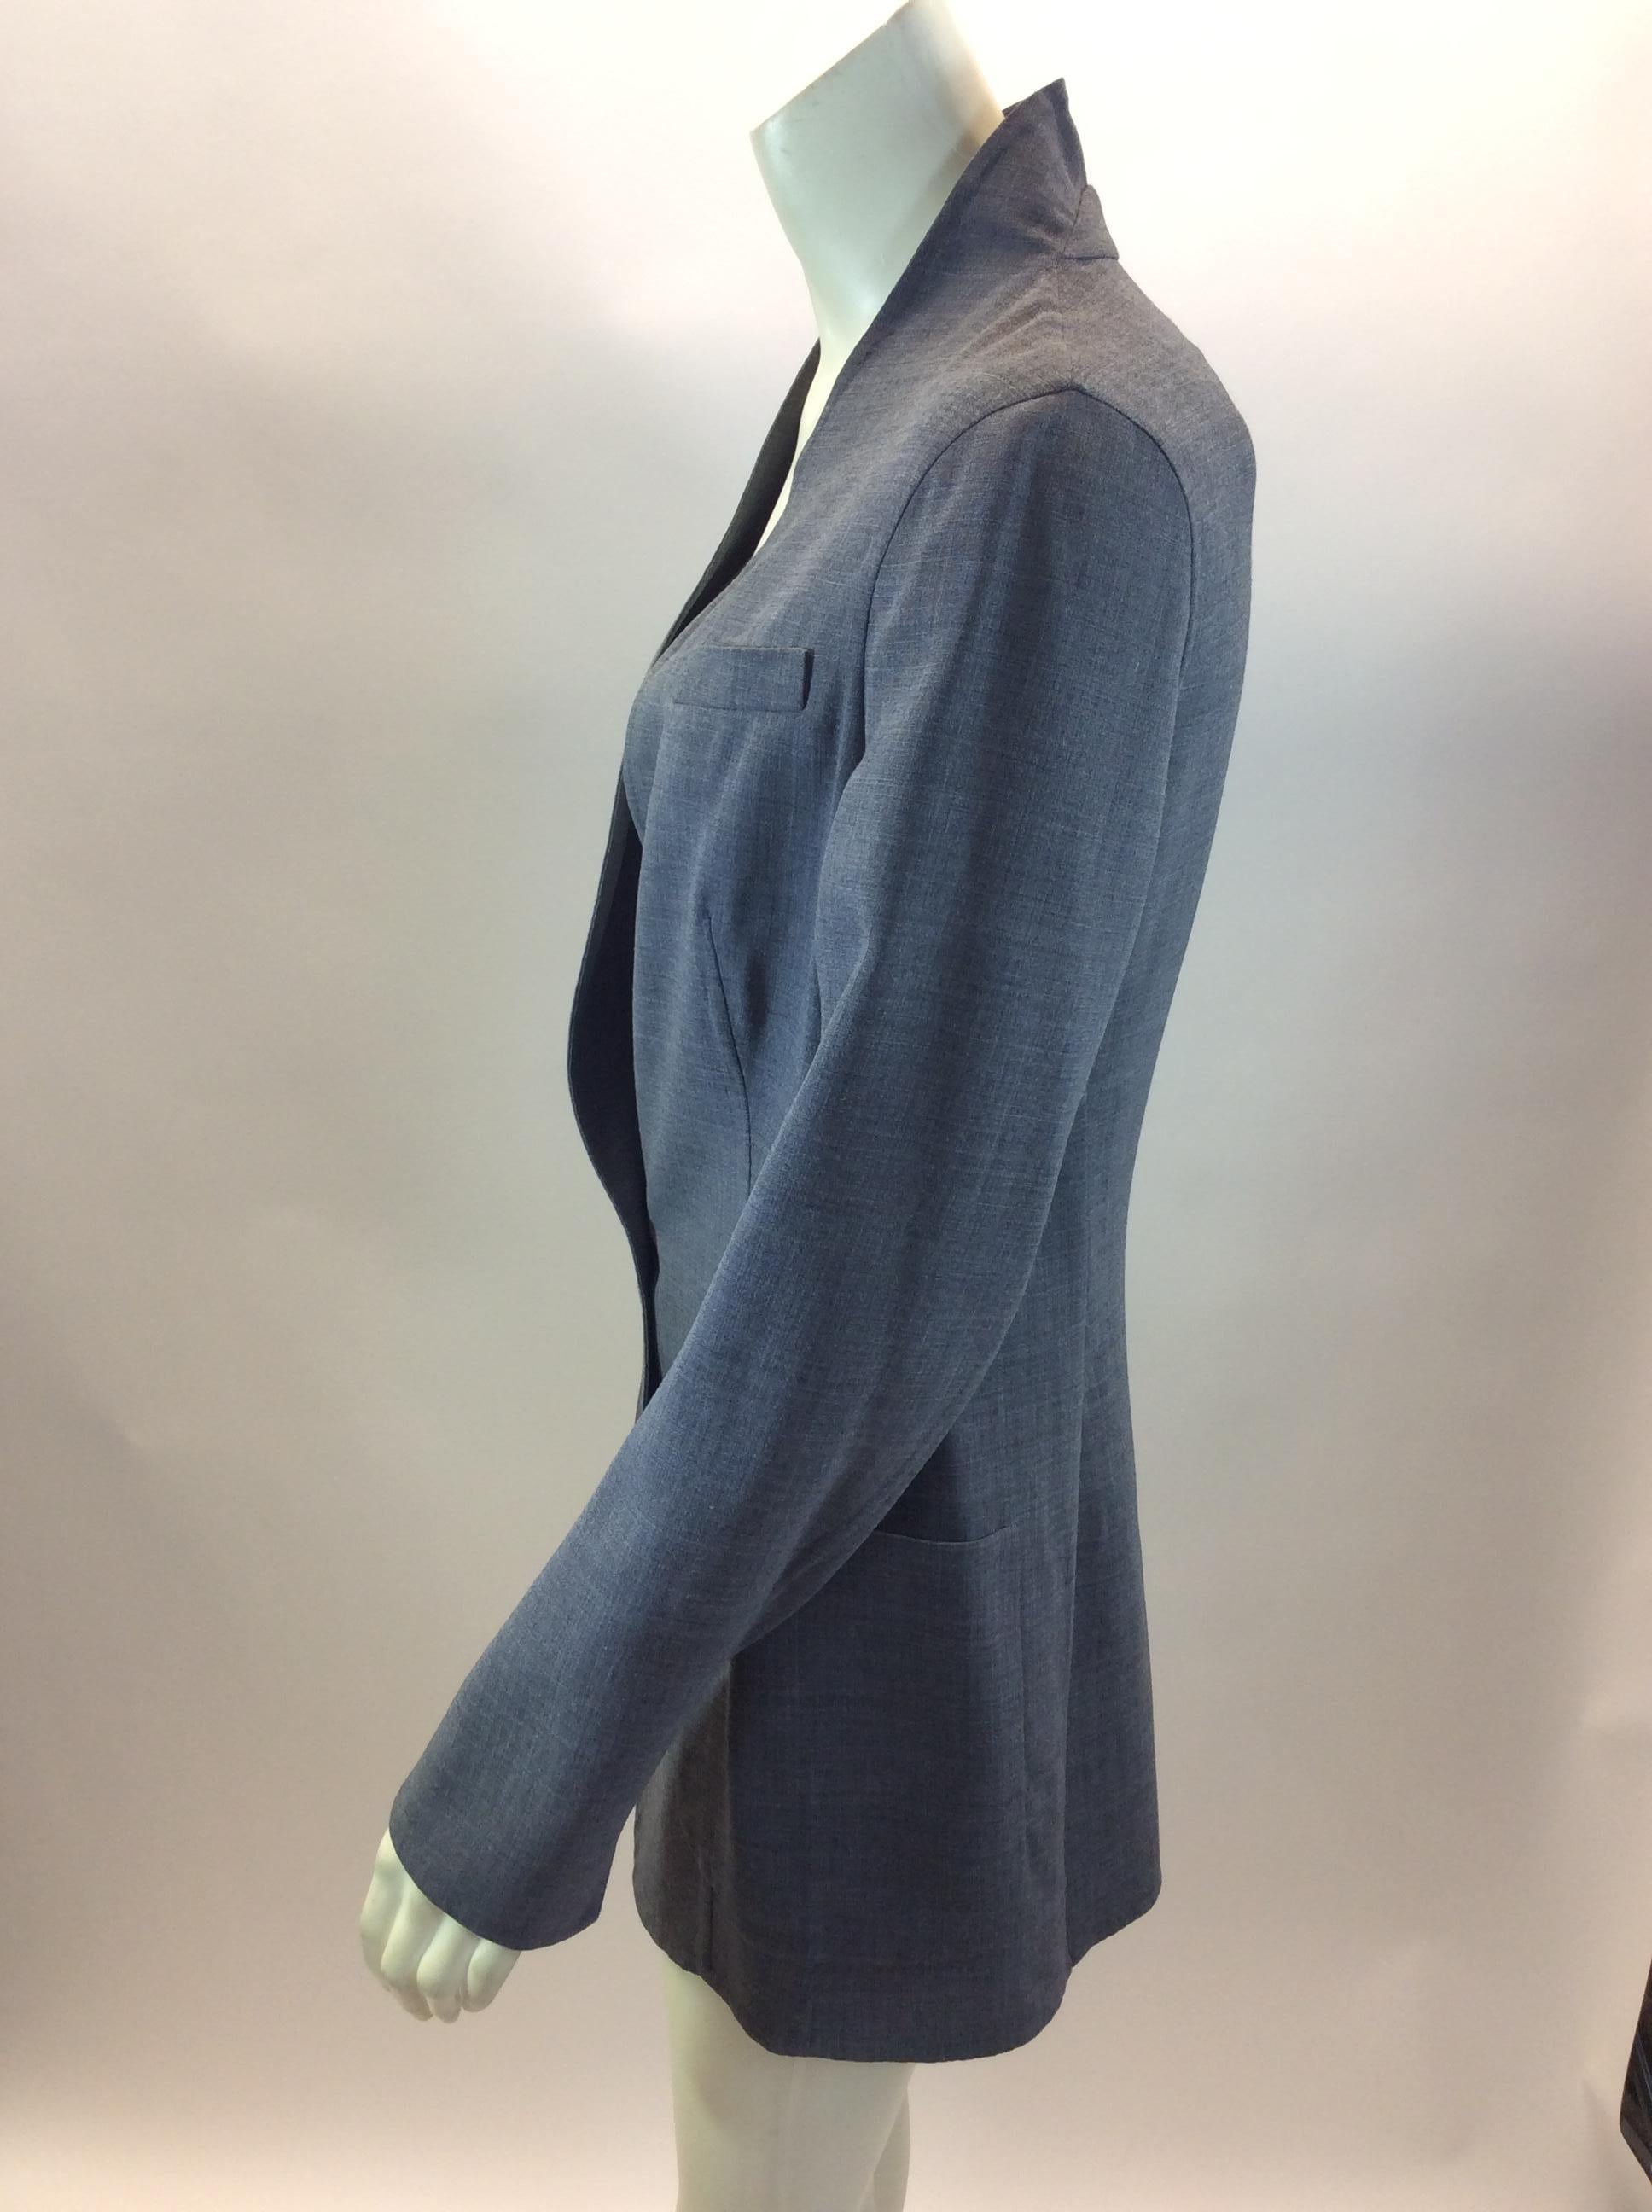 Akris Grey Linen and Wool Jacket
$599
Made in Switzerland
60% Linen
40% Wool
Size 6
Length 29